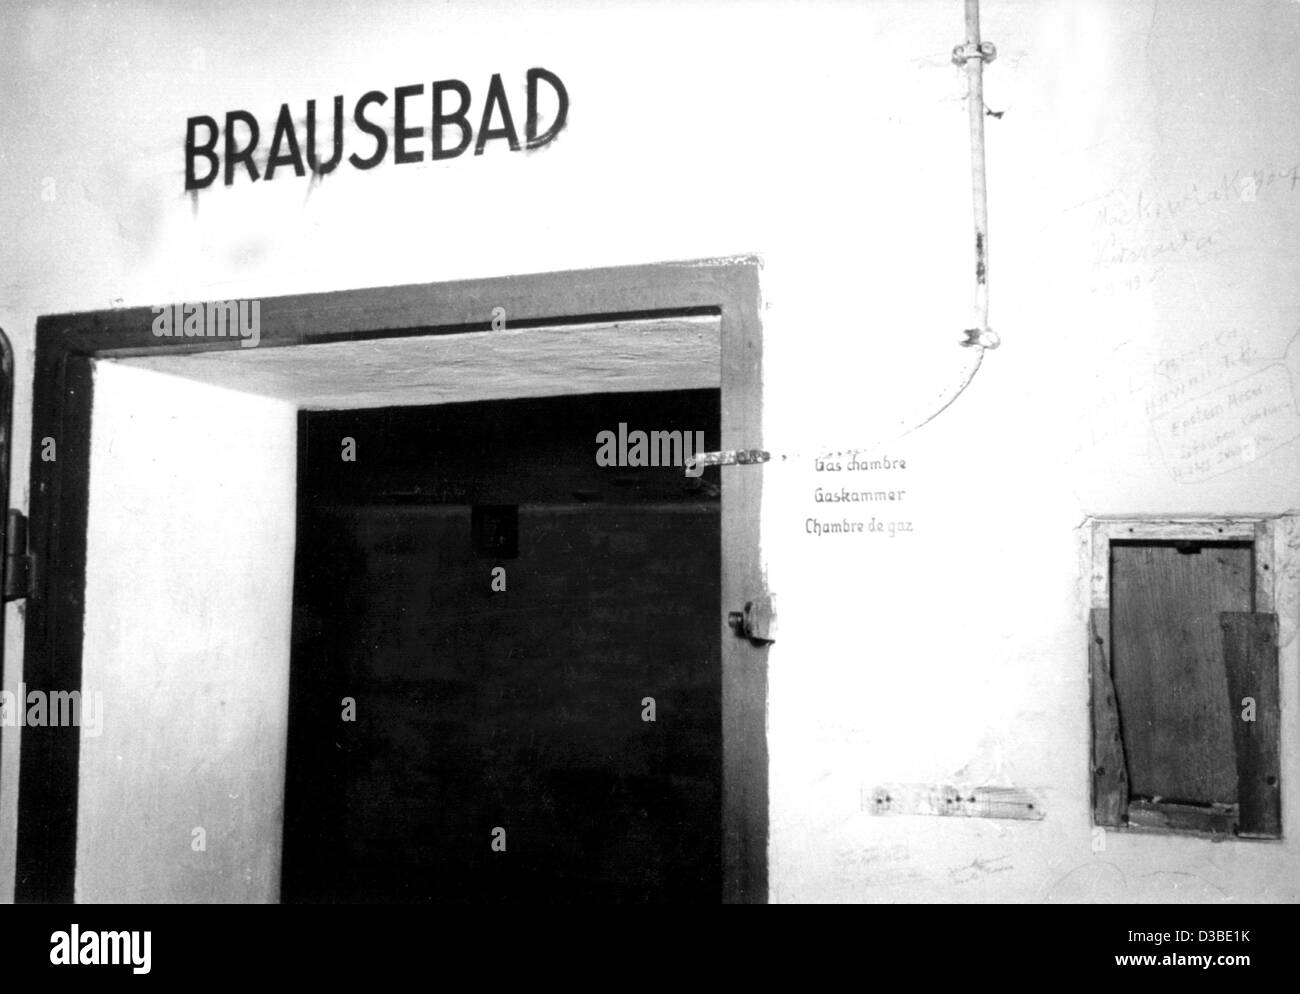 (dpa files) - This is the doorway to one of the five gas chambers Nazis built in 1943 at the concentration camp in Dachau, southern Germany (undated filer).  The writing above the entryway reads 'Brausebad' (shower room).  To the right of the entrance, the words 'gas chamber' appear in three languag Stock Photo